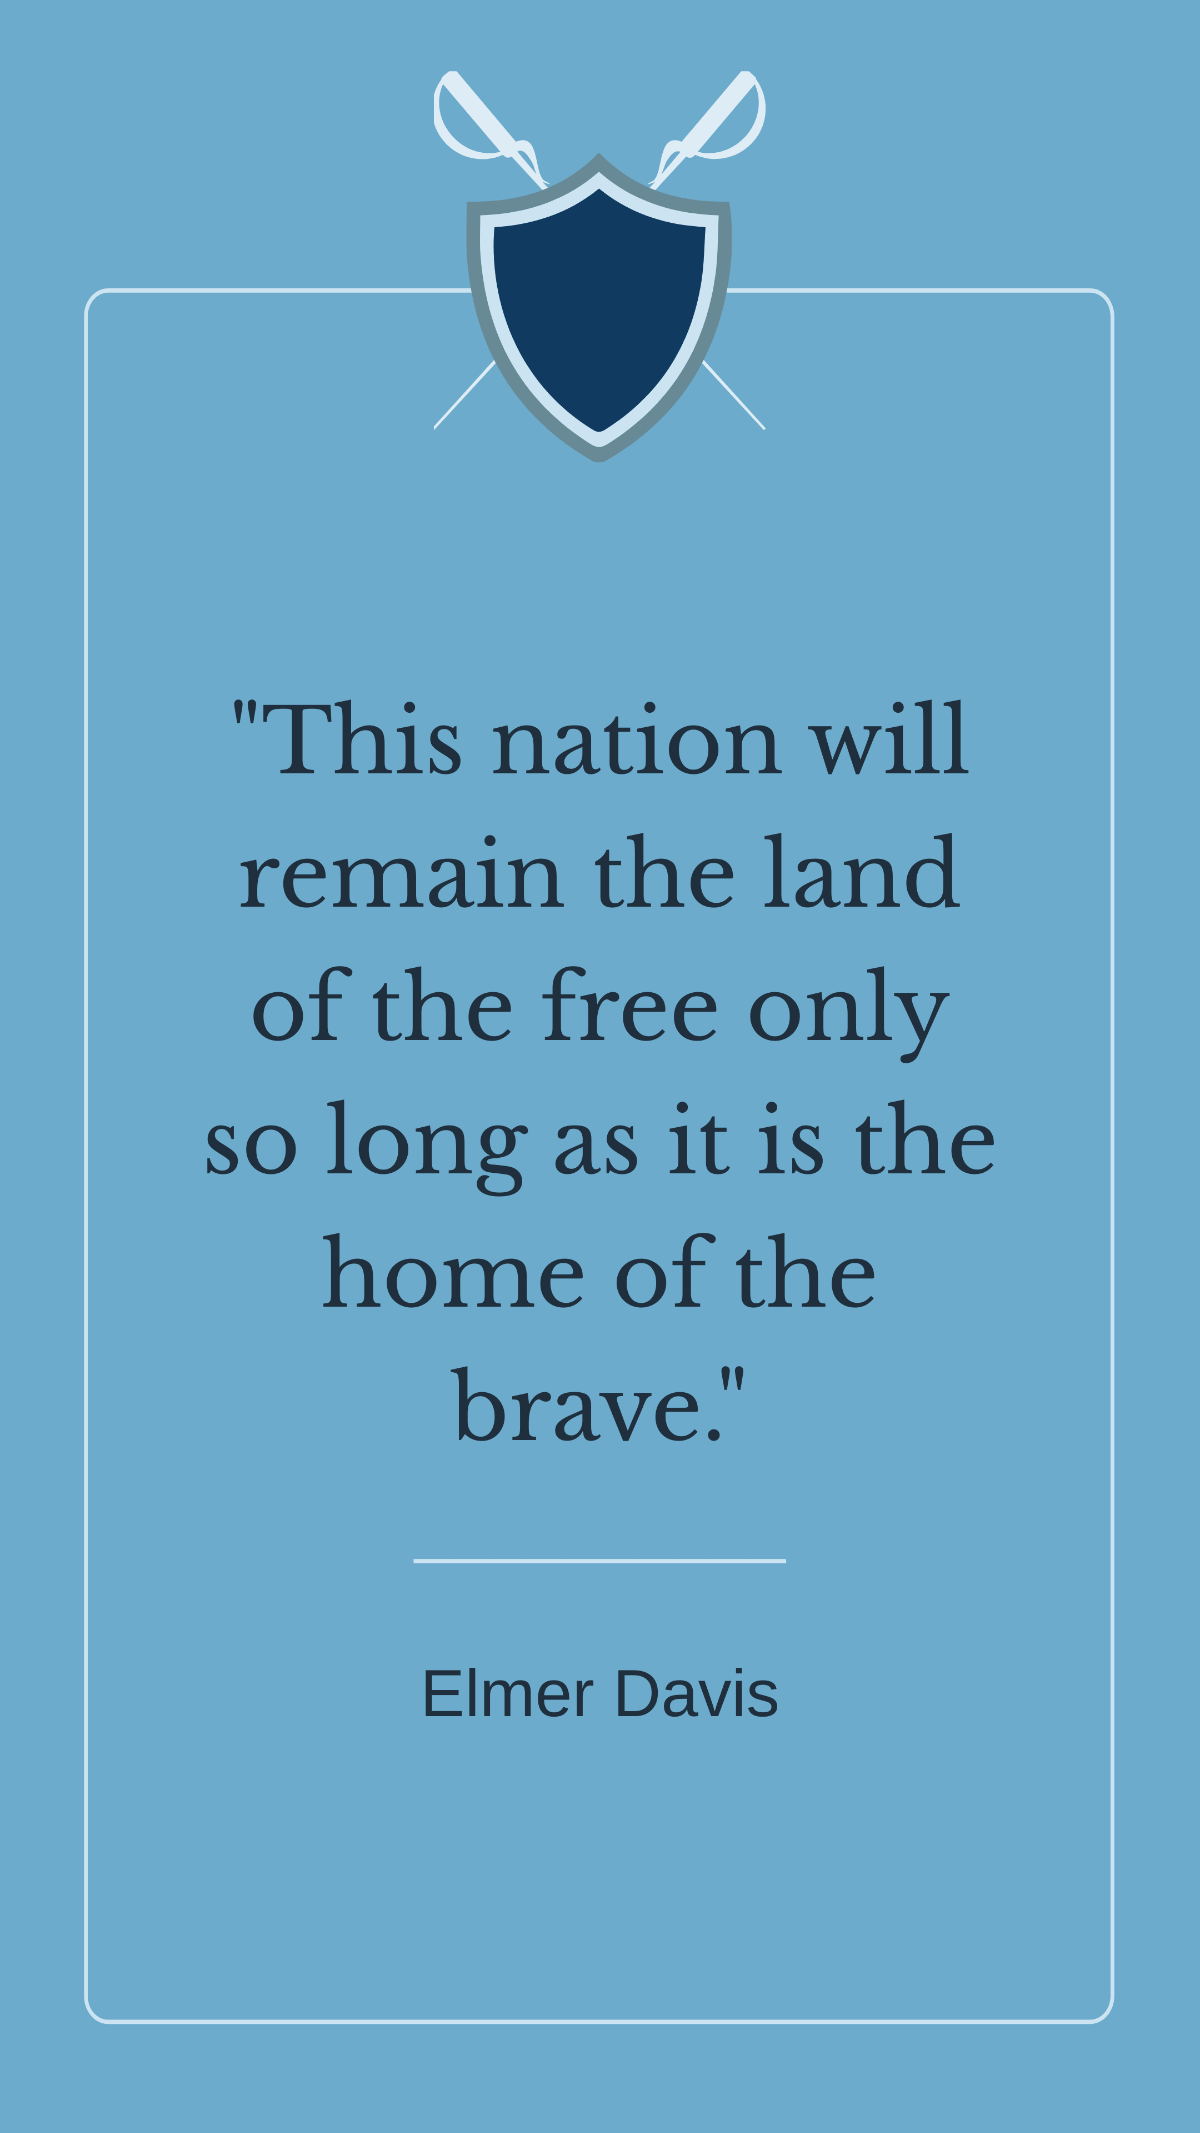 Free Elmer Davis - This nation will remain the land of the only so long as it is the home of the brave Template